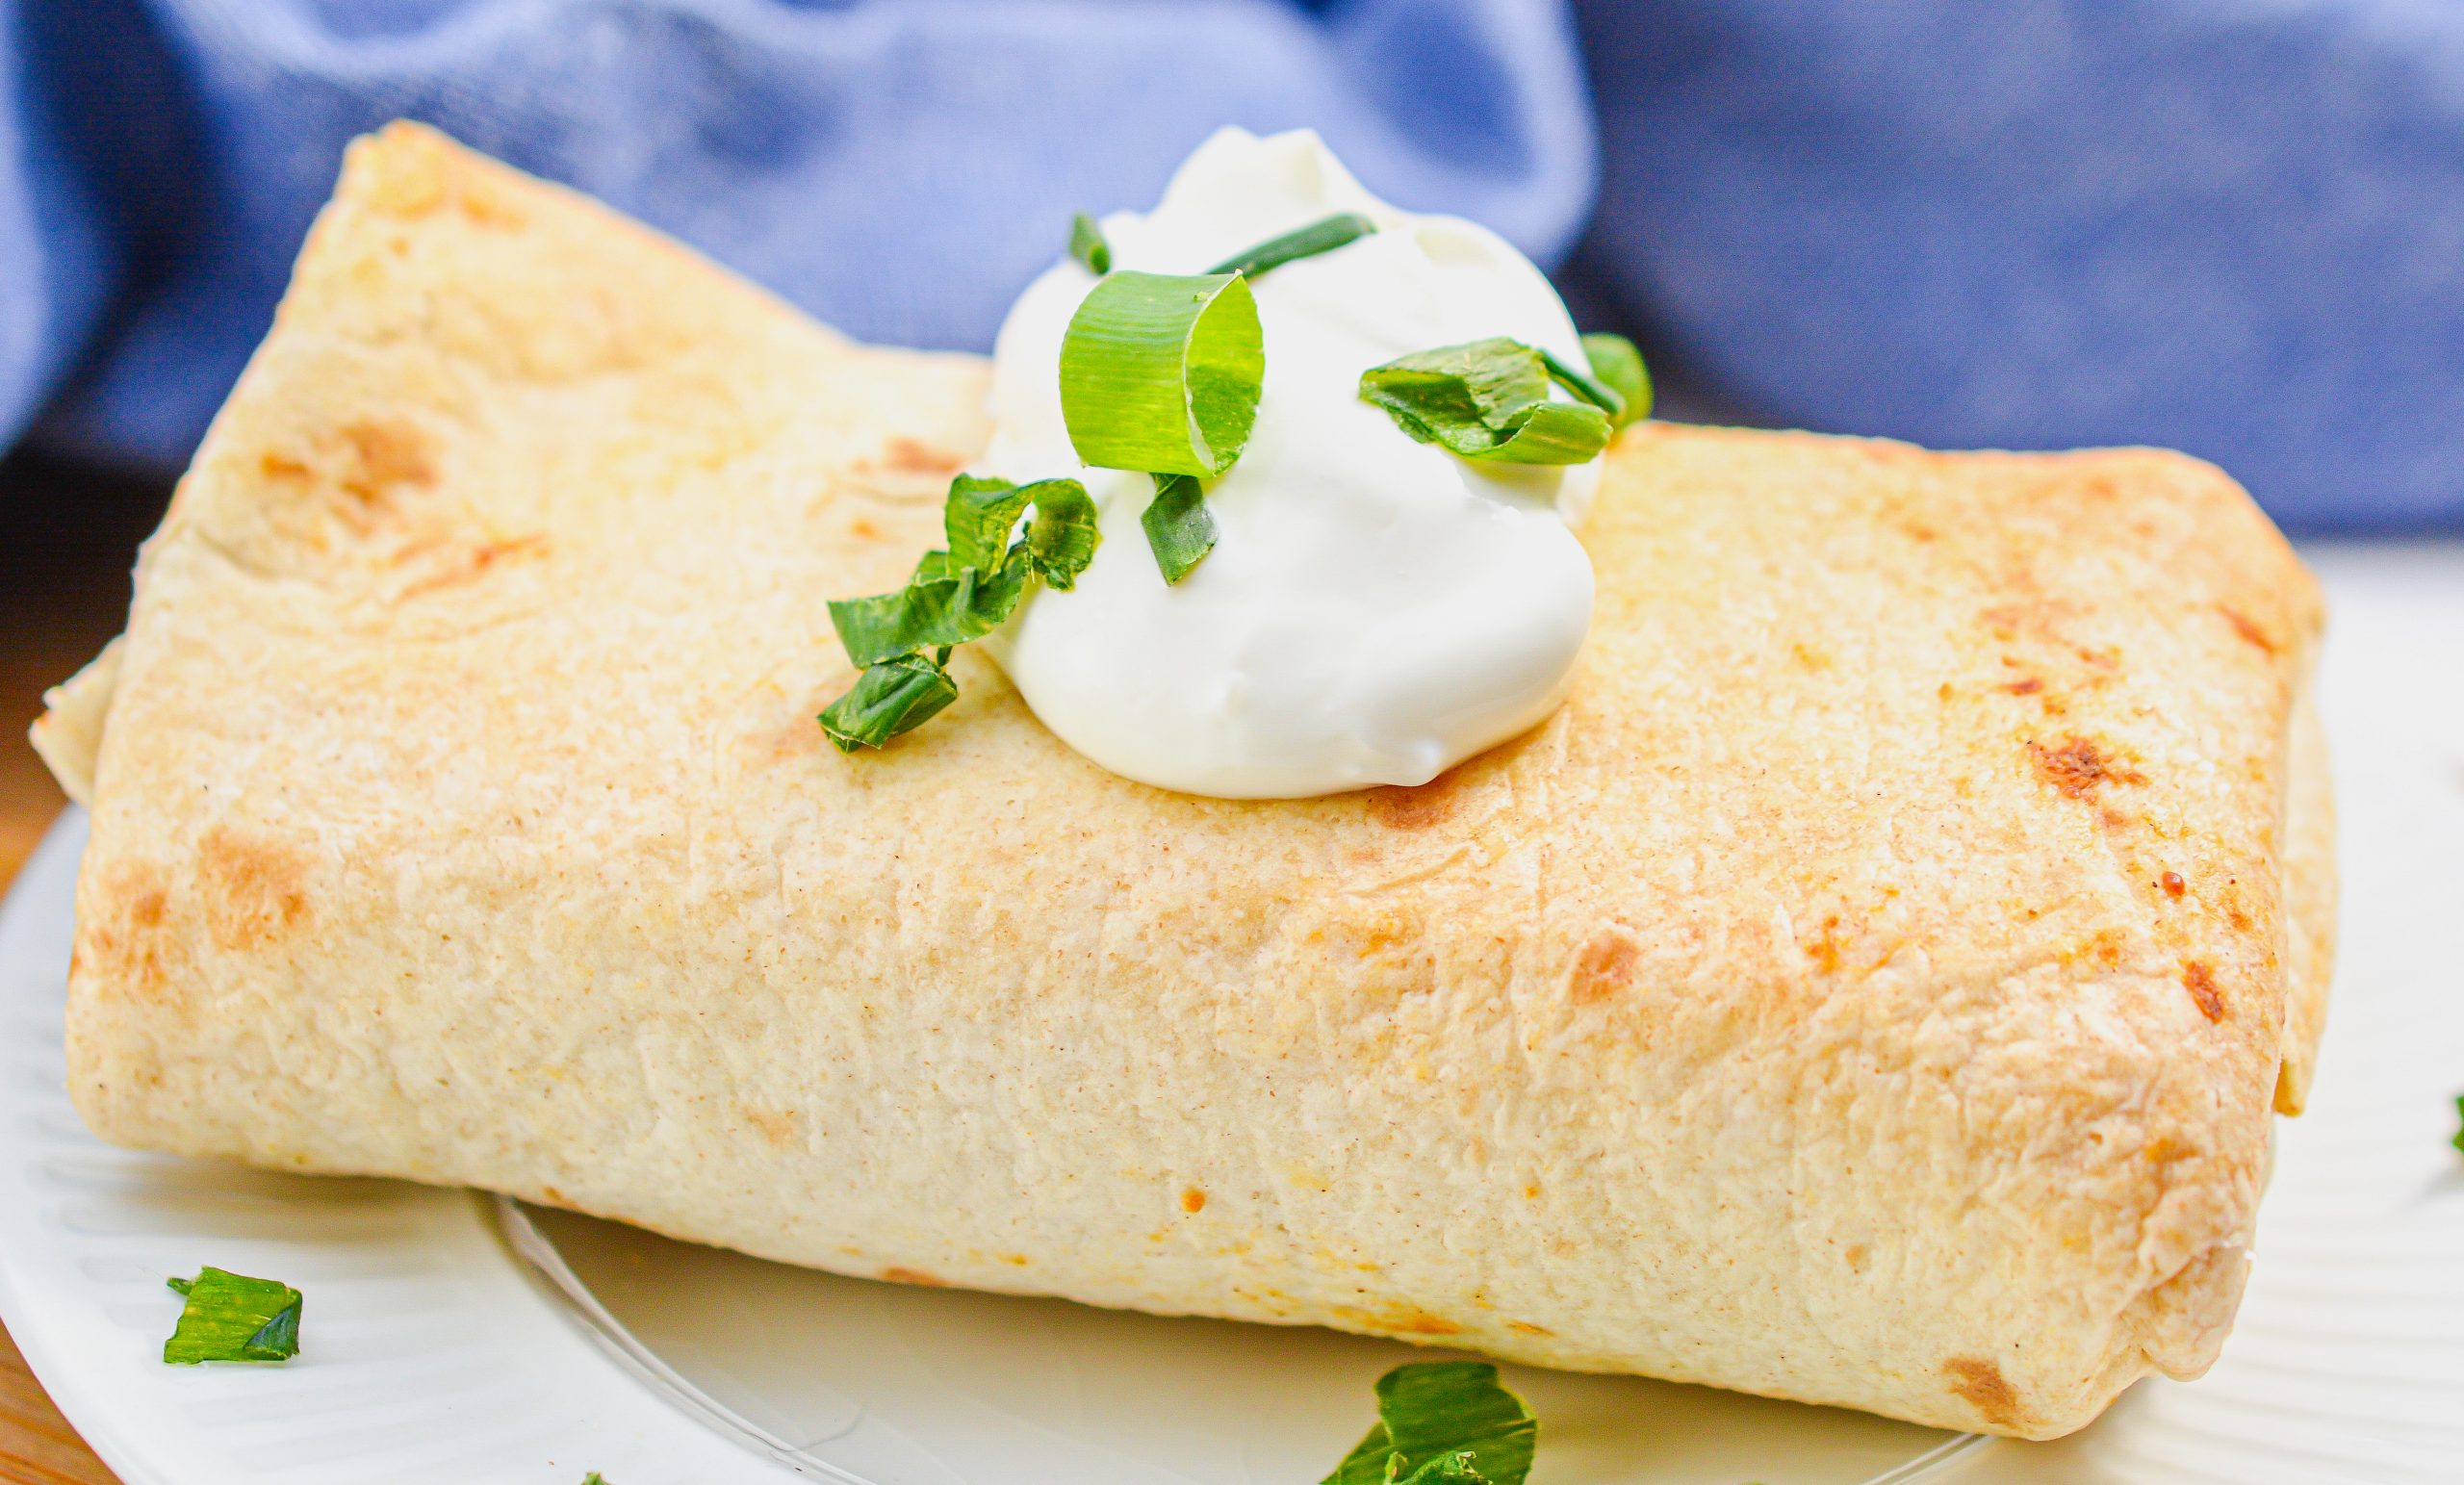 Our top-rated Oven Baked Chimichangas are back on the menu this